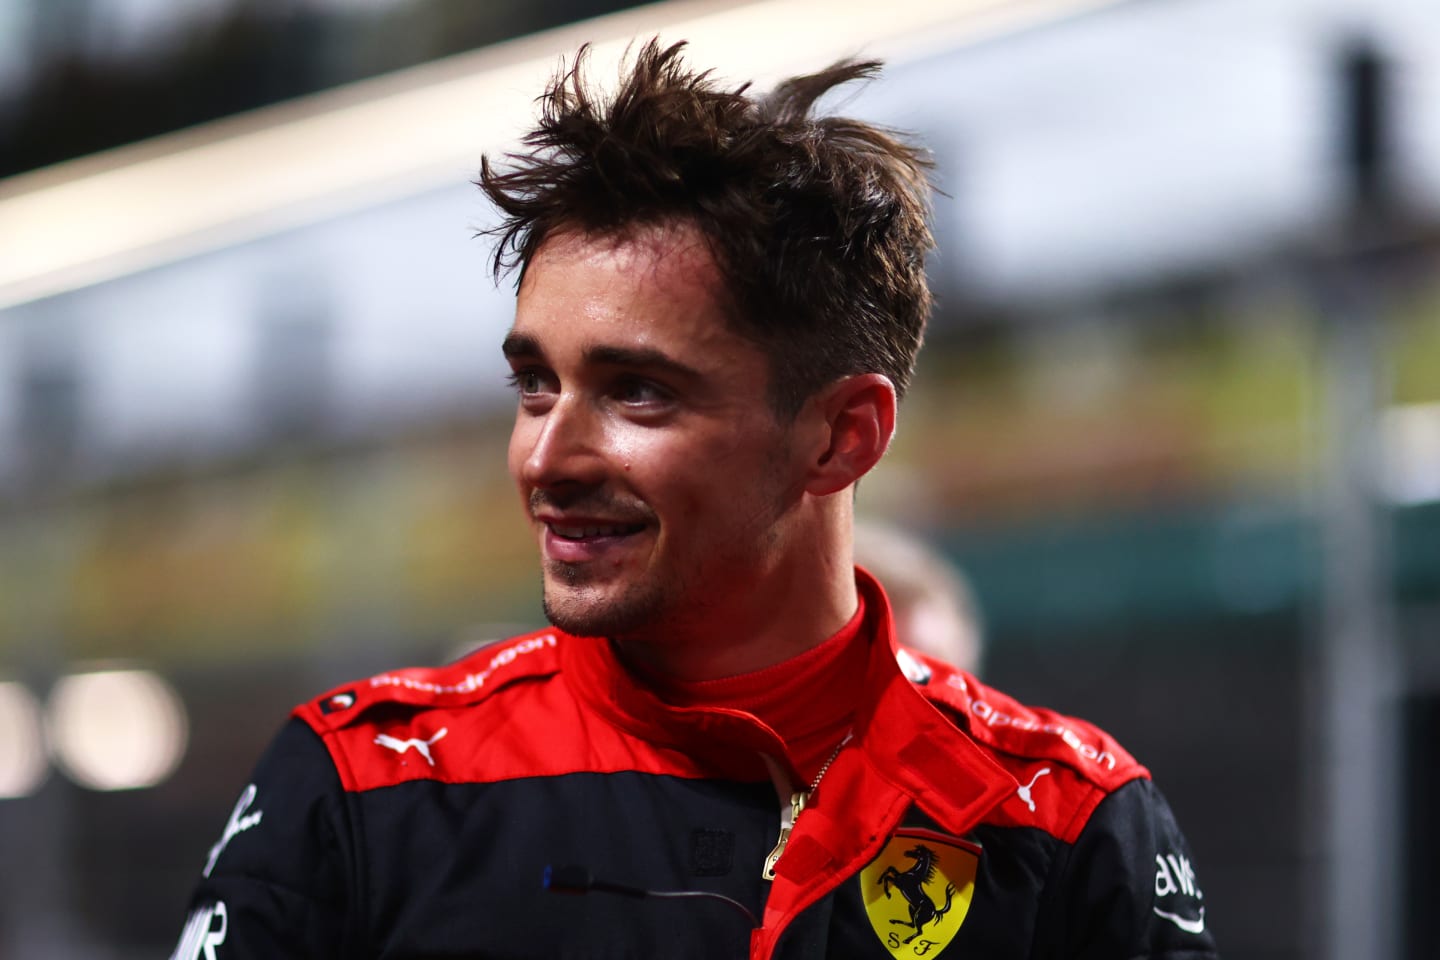 JEDDAH, SAUDI ARABIA - MARCH 26: Second placed qualifier Charles Leclerc of Monaco and Ferrari smiles in parc ferme during qualifying ahead of the F1 Grand Prix of Saudi Arabia at the Jeddah Corniche Circuit on March 26, 2022 in Jeddah, Saudi Arabia. (Photo by Dan Istitene - Formula 1/Formula 1 via Getty Images)